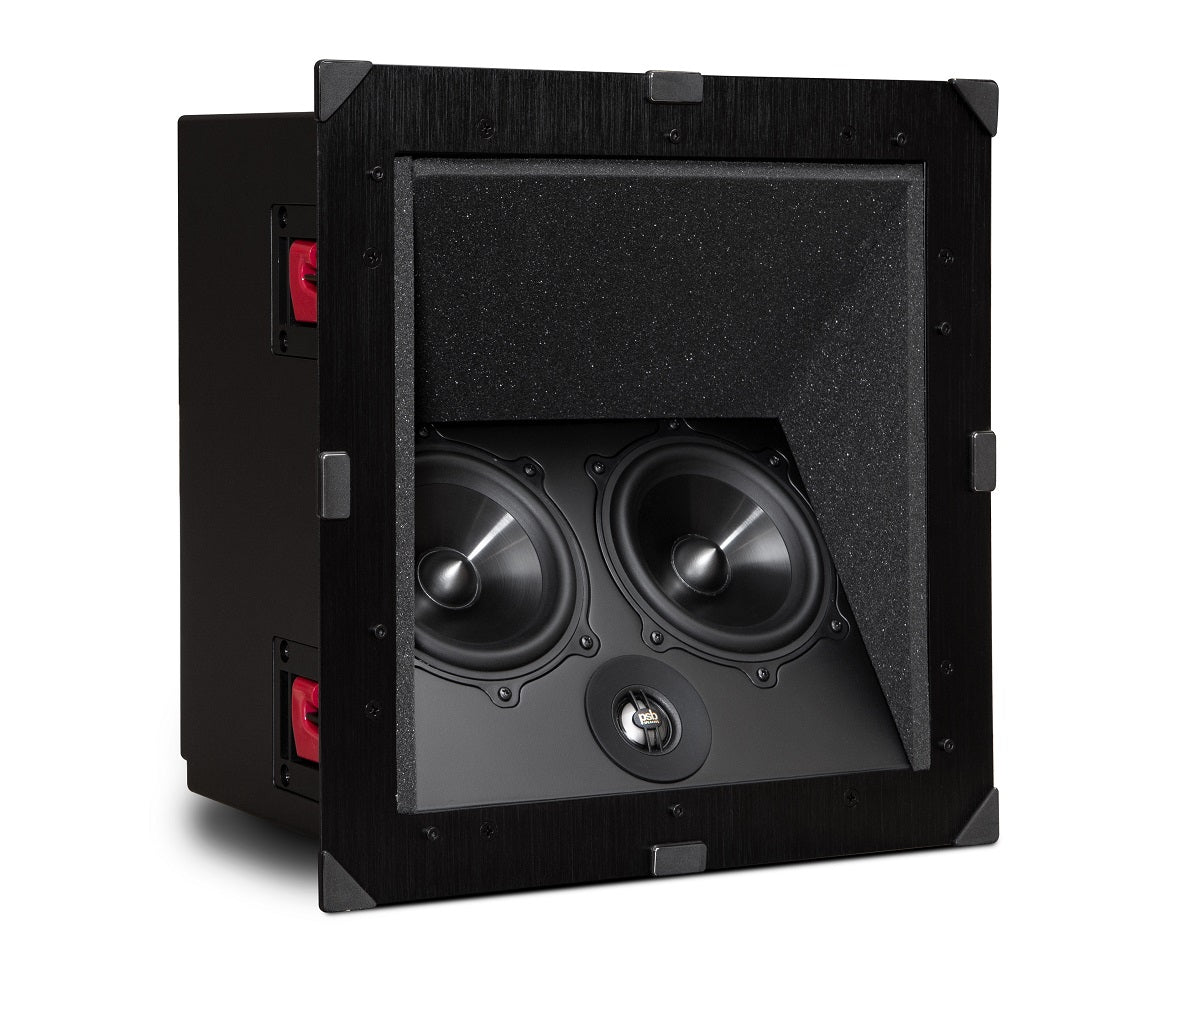 PSB IMAGINE C-LCR IN-CEILING SPEAKER | VINYL SOUND USA PSB C-LCR IN-CEILING Speaker - PSB Alpha IQ Speakers - PSB Imagine X1T Tower Speaker - PSB Audio is a Canada's leading manufacturer of top-performing and for high quality Audio Speakers, headphones, loudspeakers, subwoofers, Home Theater Systems, Floorstanding Speakers, Bookshelf Speakers, loudspeakers available at Vinyl Sound...